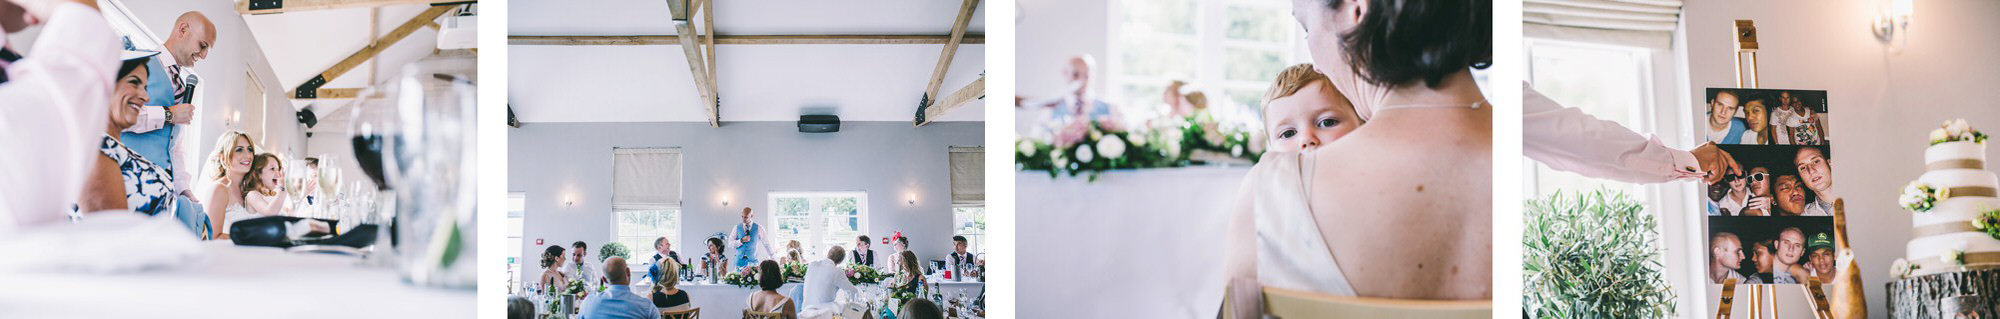 boathouse-wedding-ormesby-broad-by-james-powell-photography-027